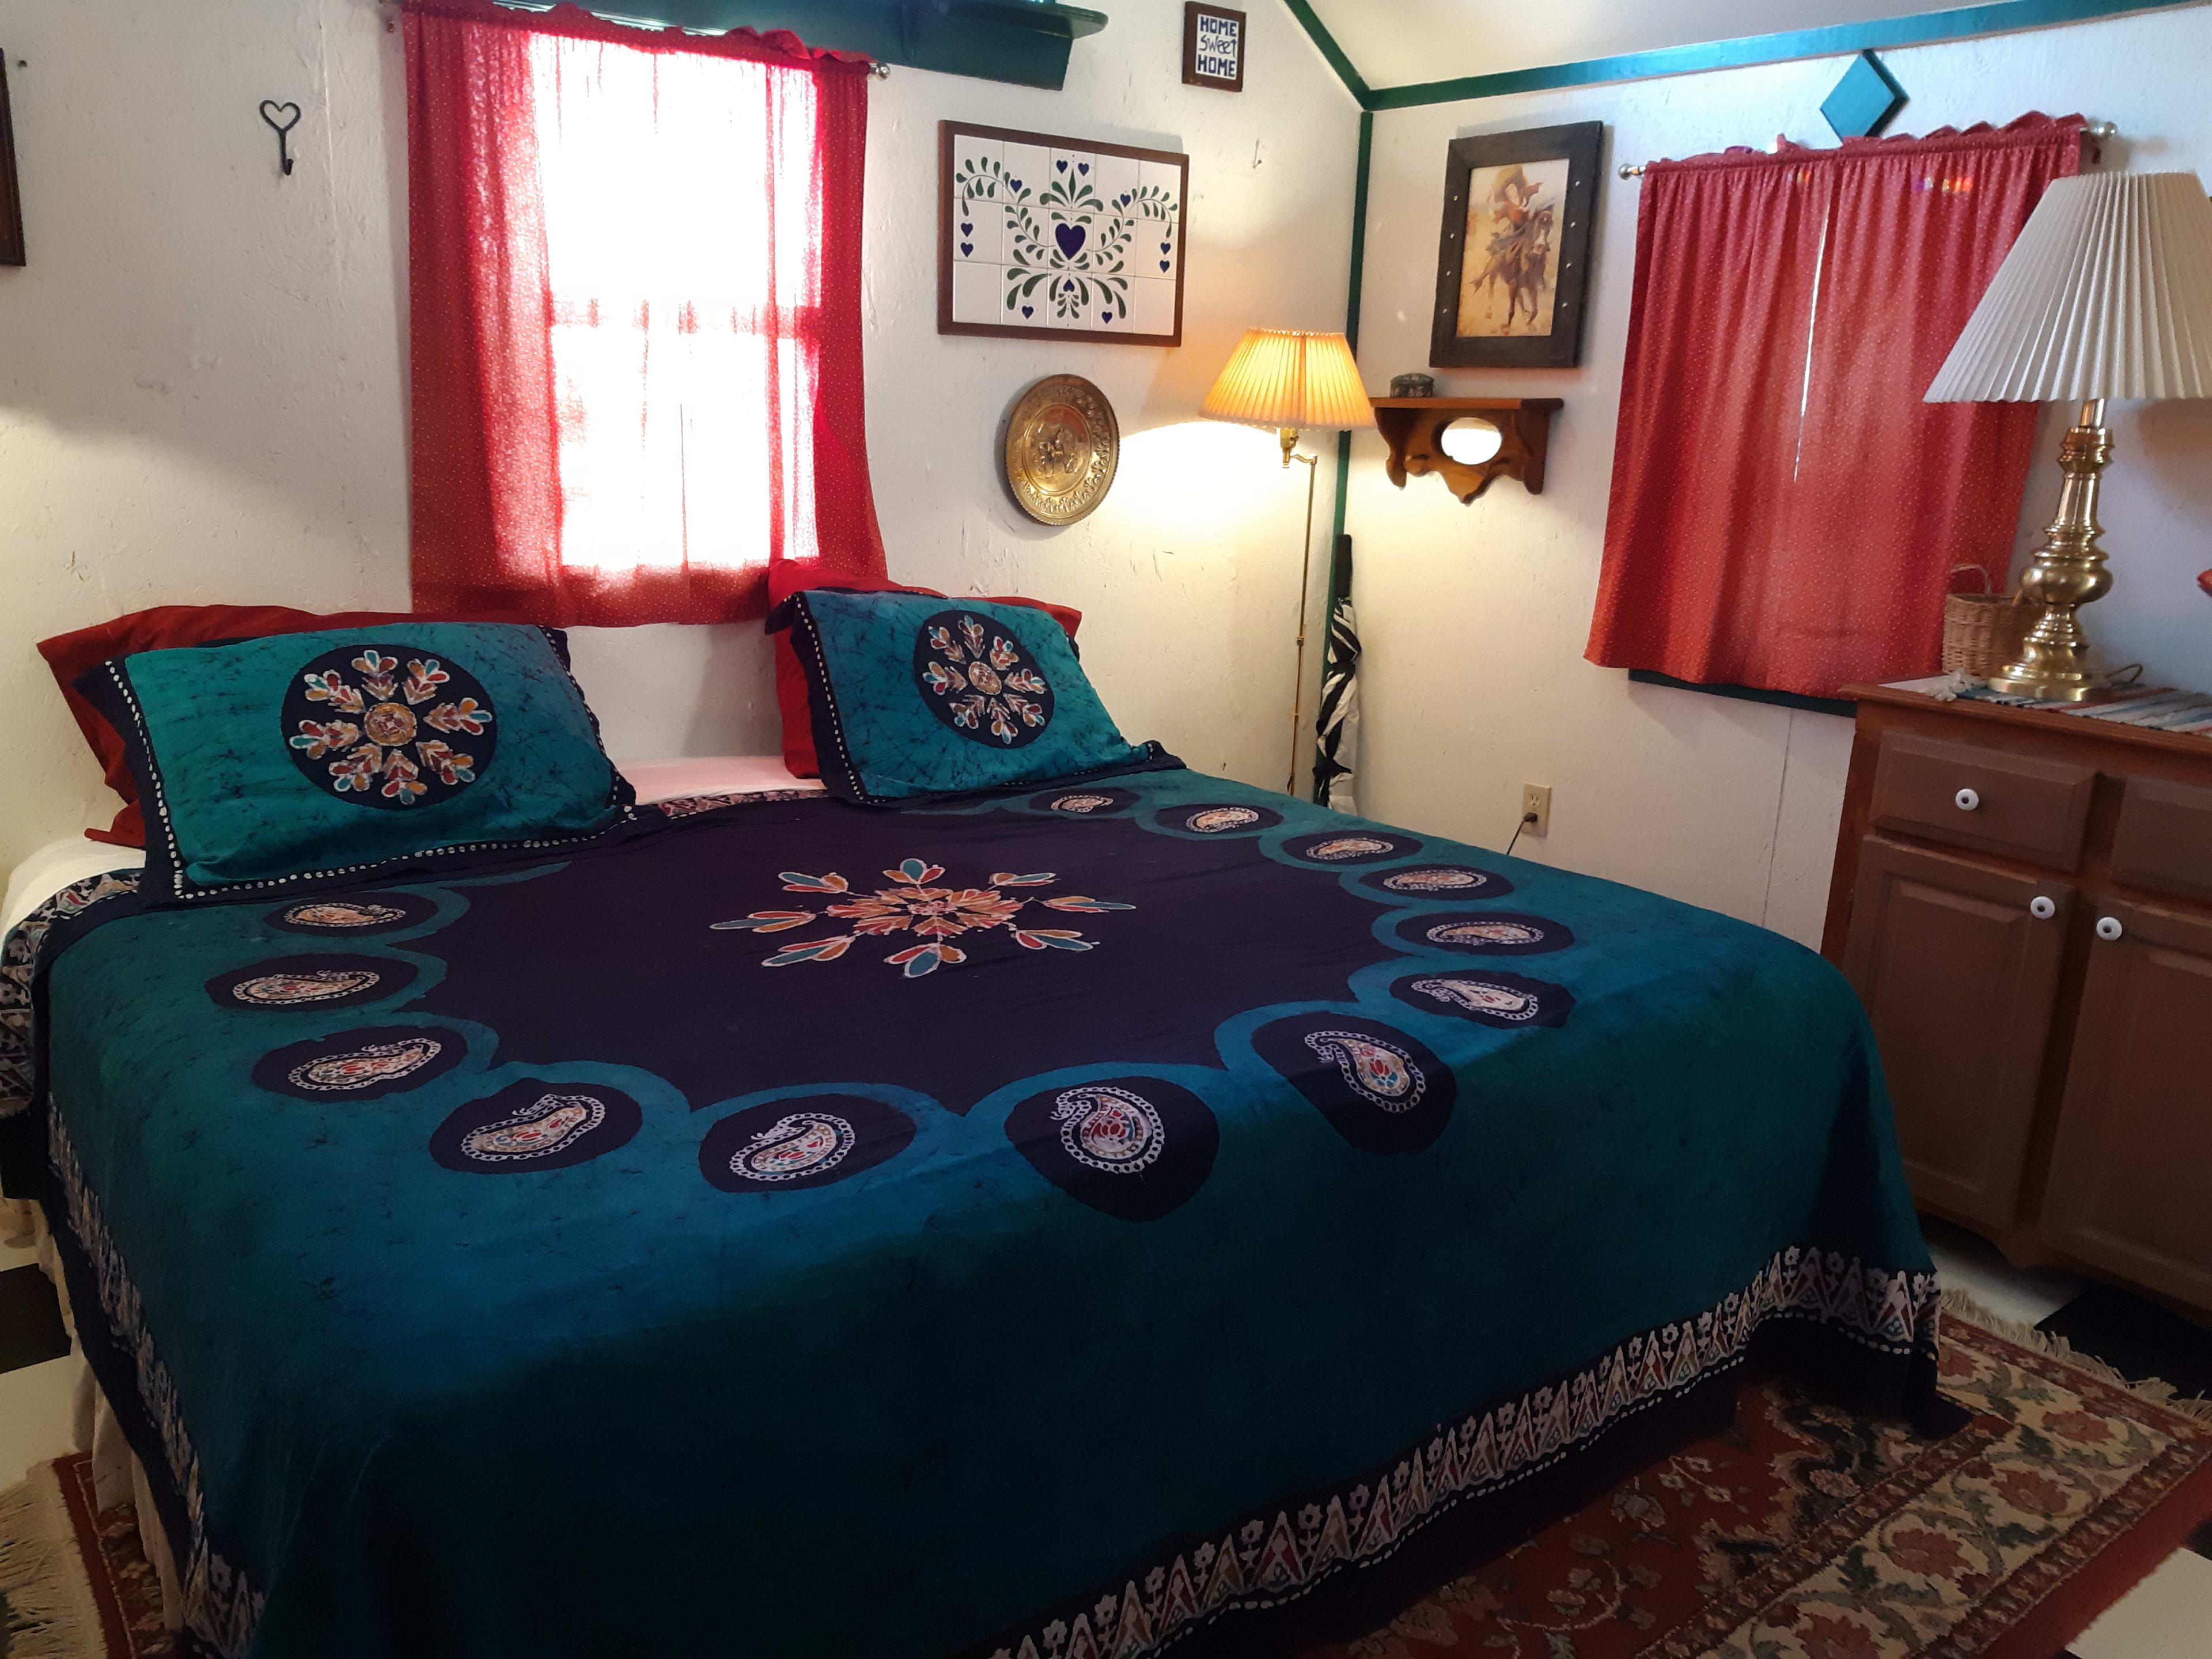 King and 2 twin beds, plus table that seats 4.  Outhouse is 30 ft from front porch,
and enclosed but open to the sky hot water shower is around behind the bungalow.